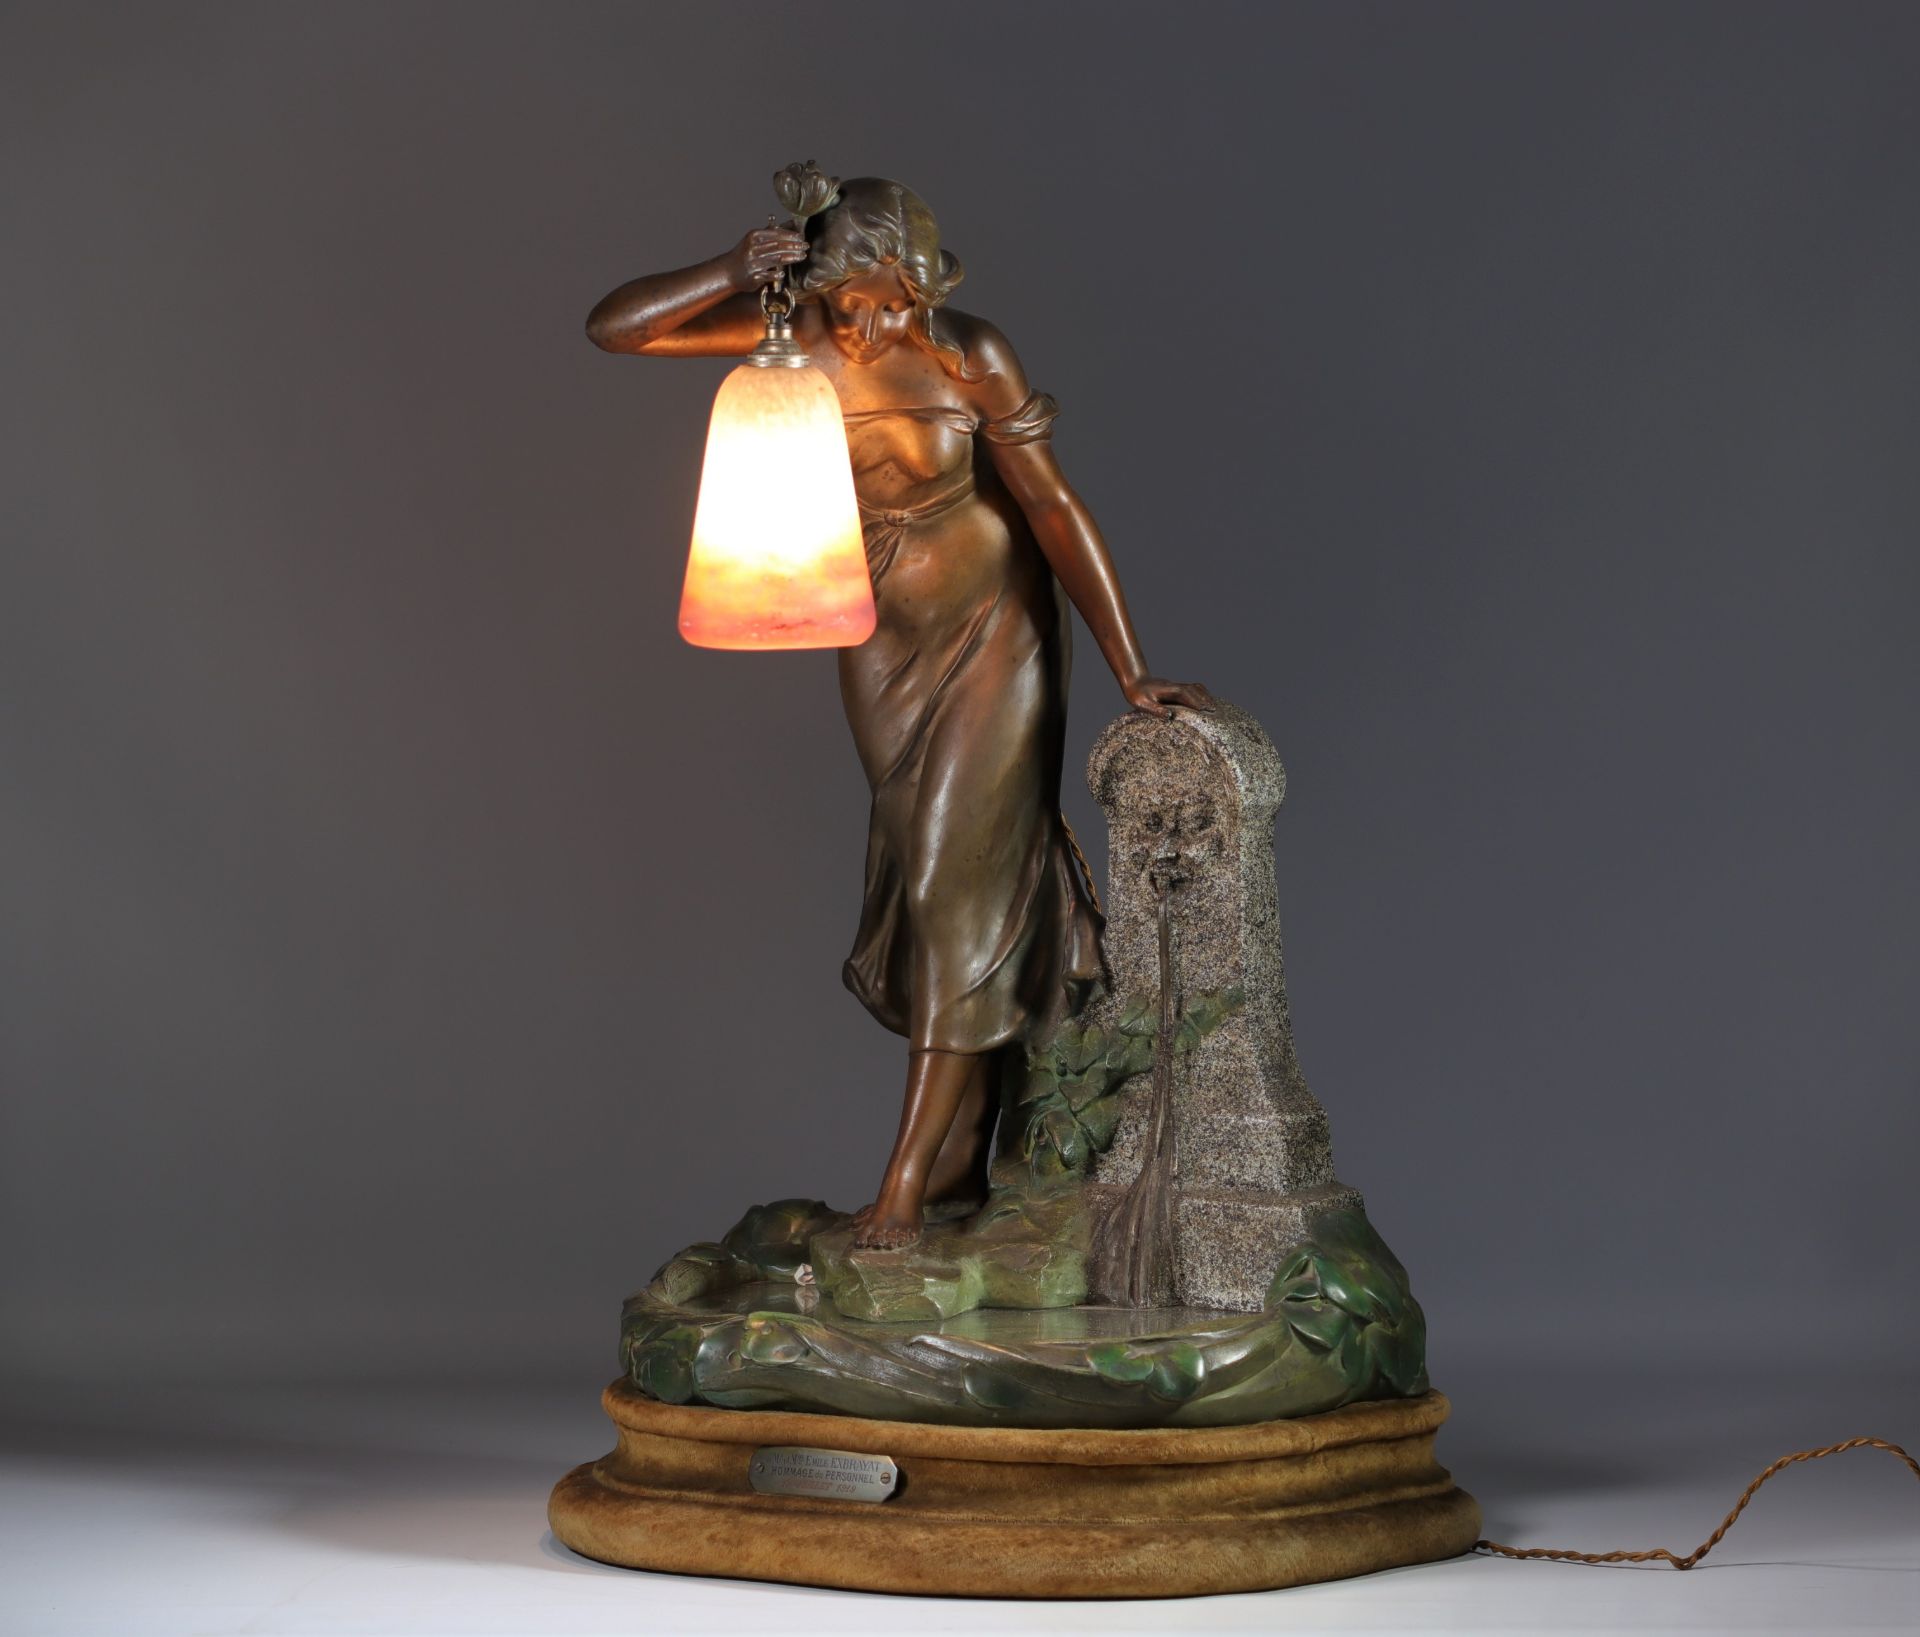 Imposing Art Nouveau lamp, young woman at a pond